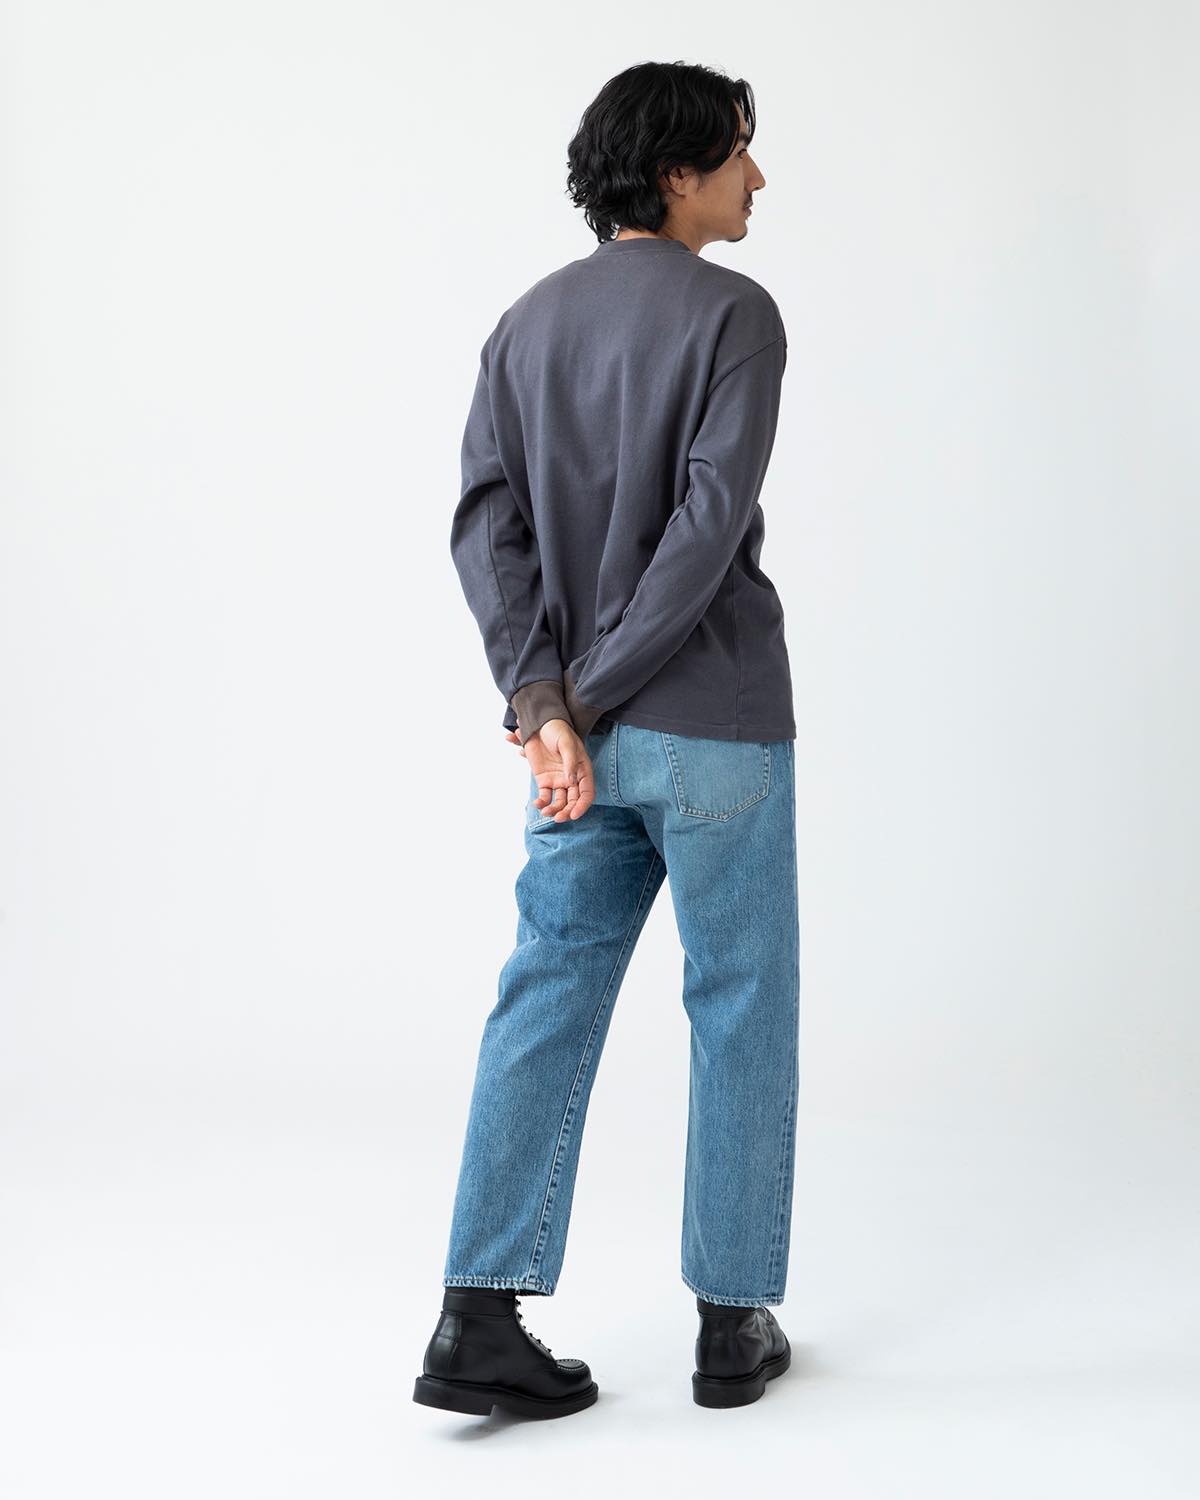 UNLIKELY TIME TRAVEL JEANS 1977 WASH